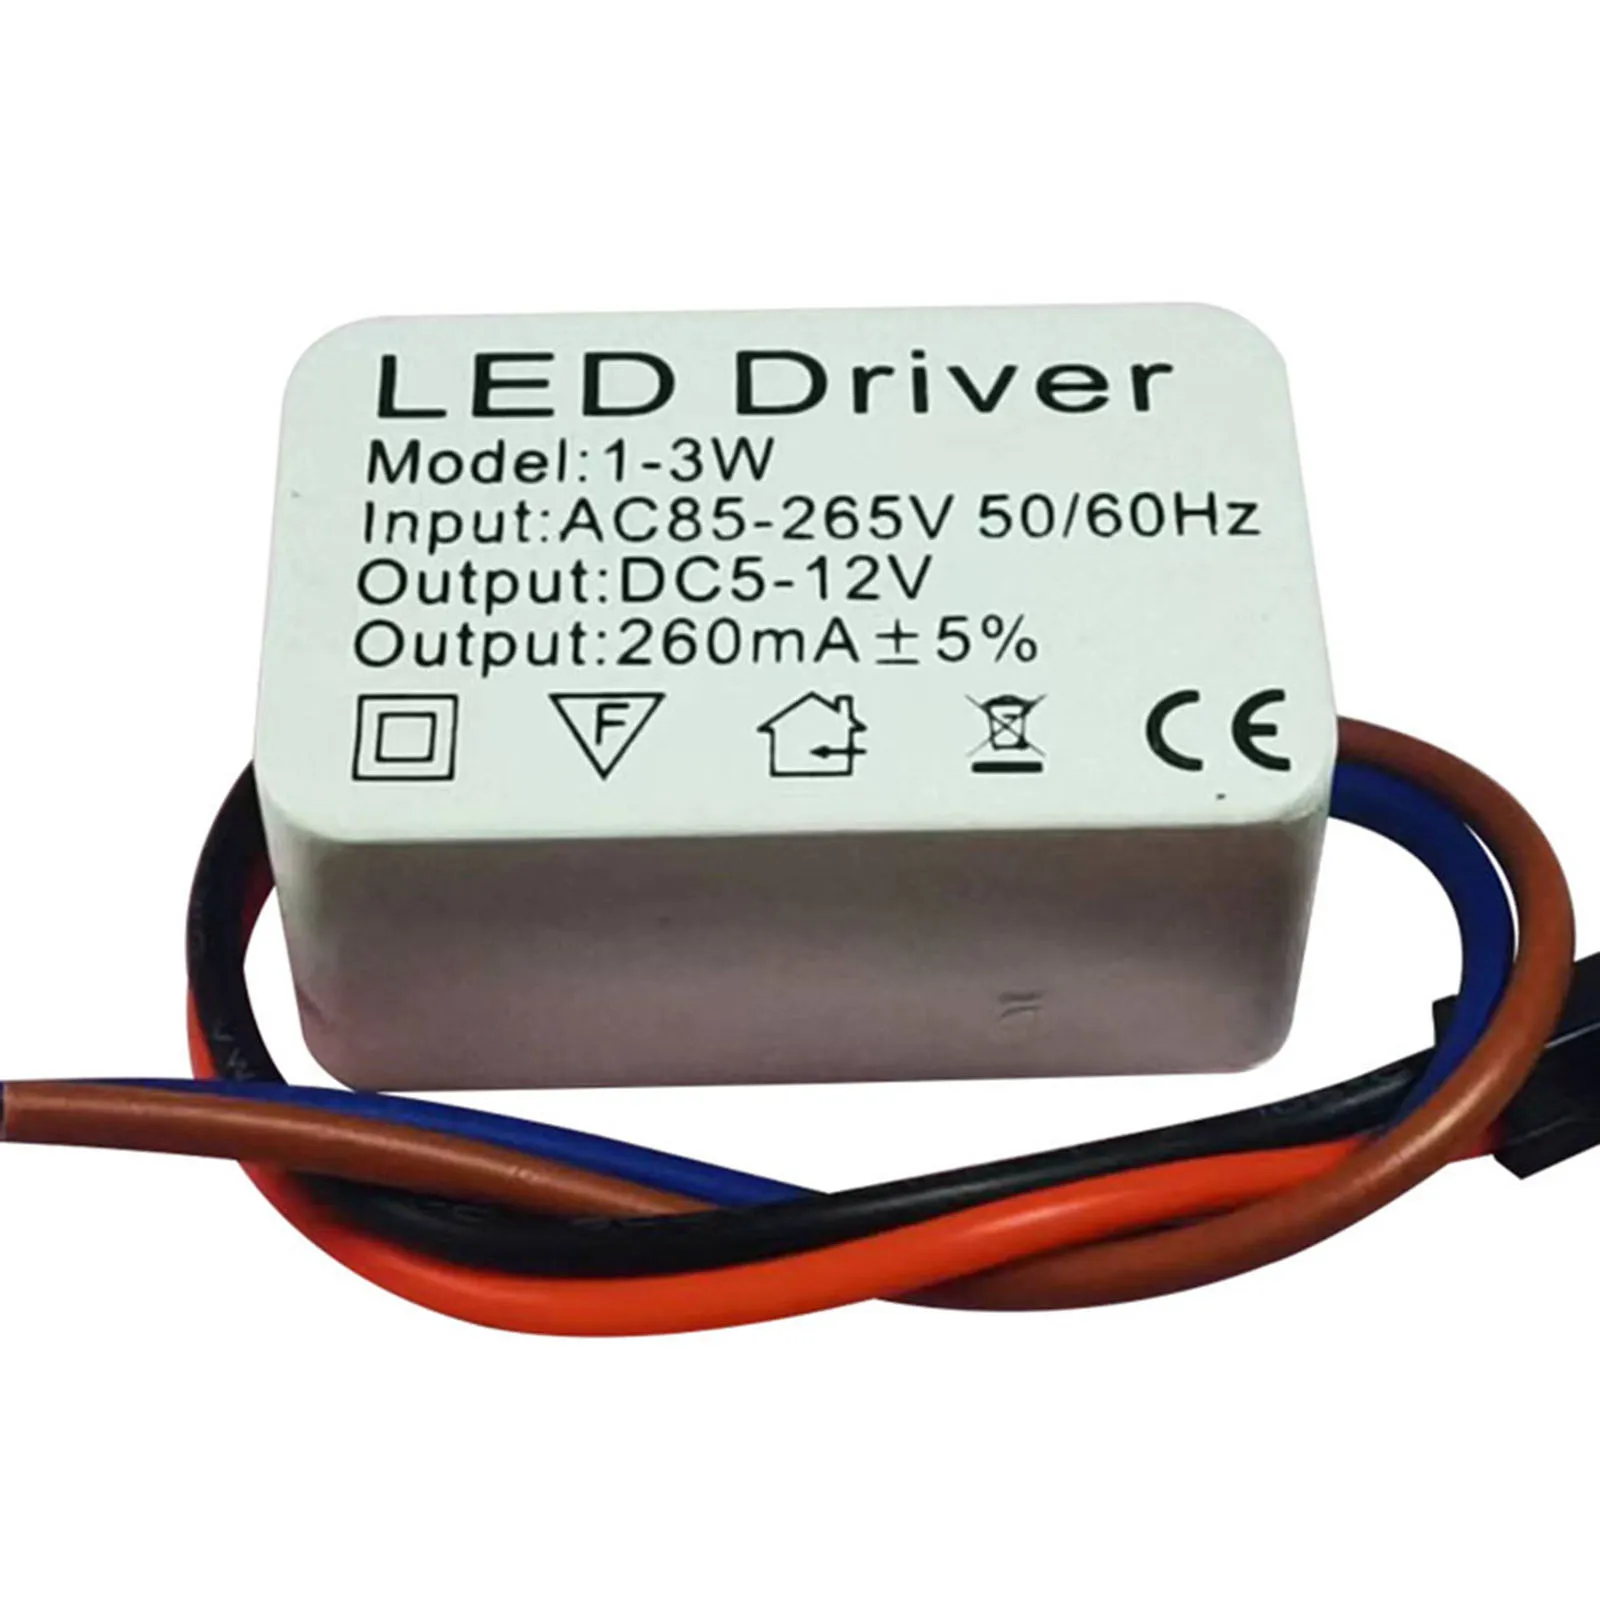 

LED Driver 1-3W,3-5W,4-7W,8-12W,12-18W,18-24W Light Transformer Constant Current Power Adapter Lamp Strip LED Driver Power